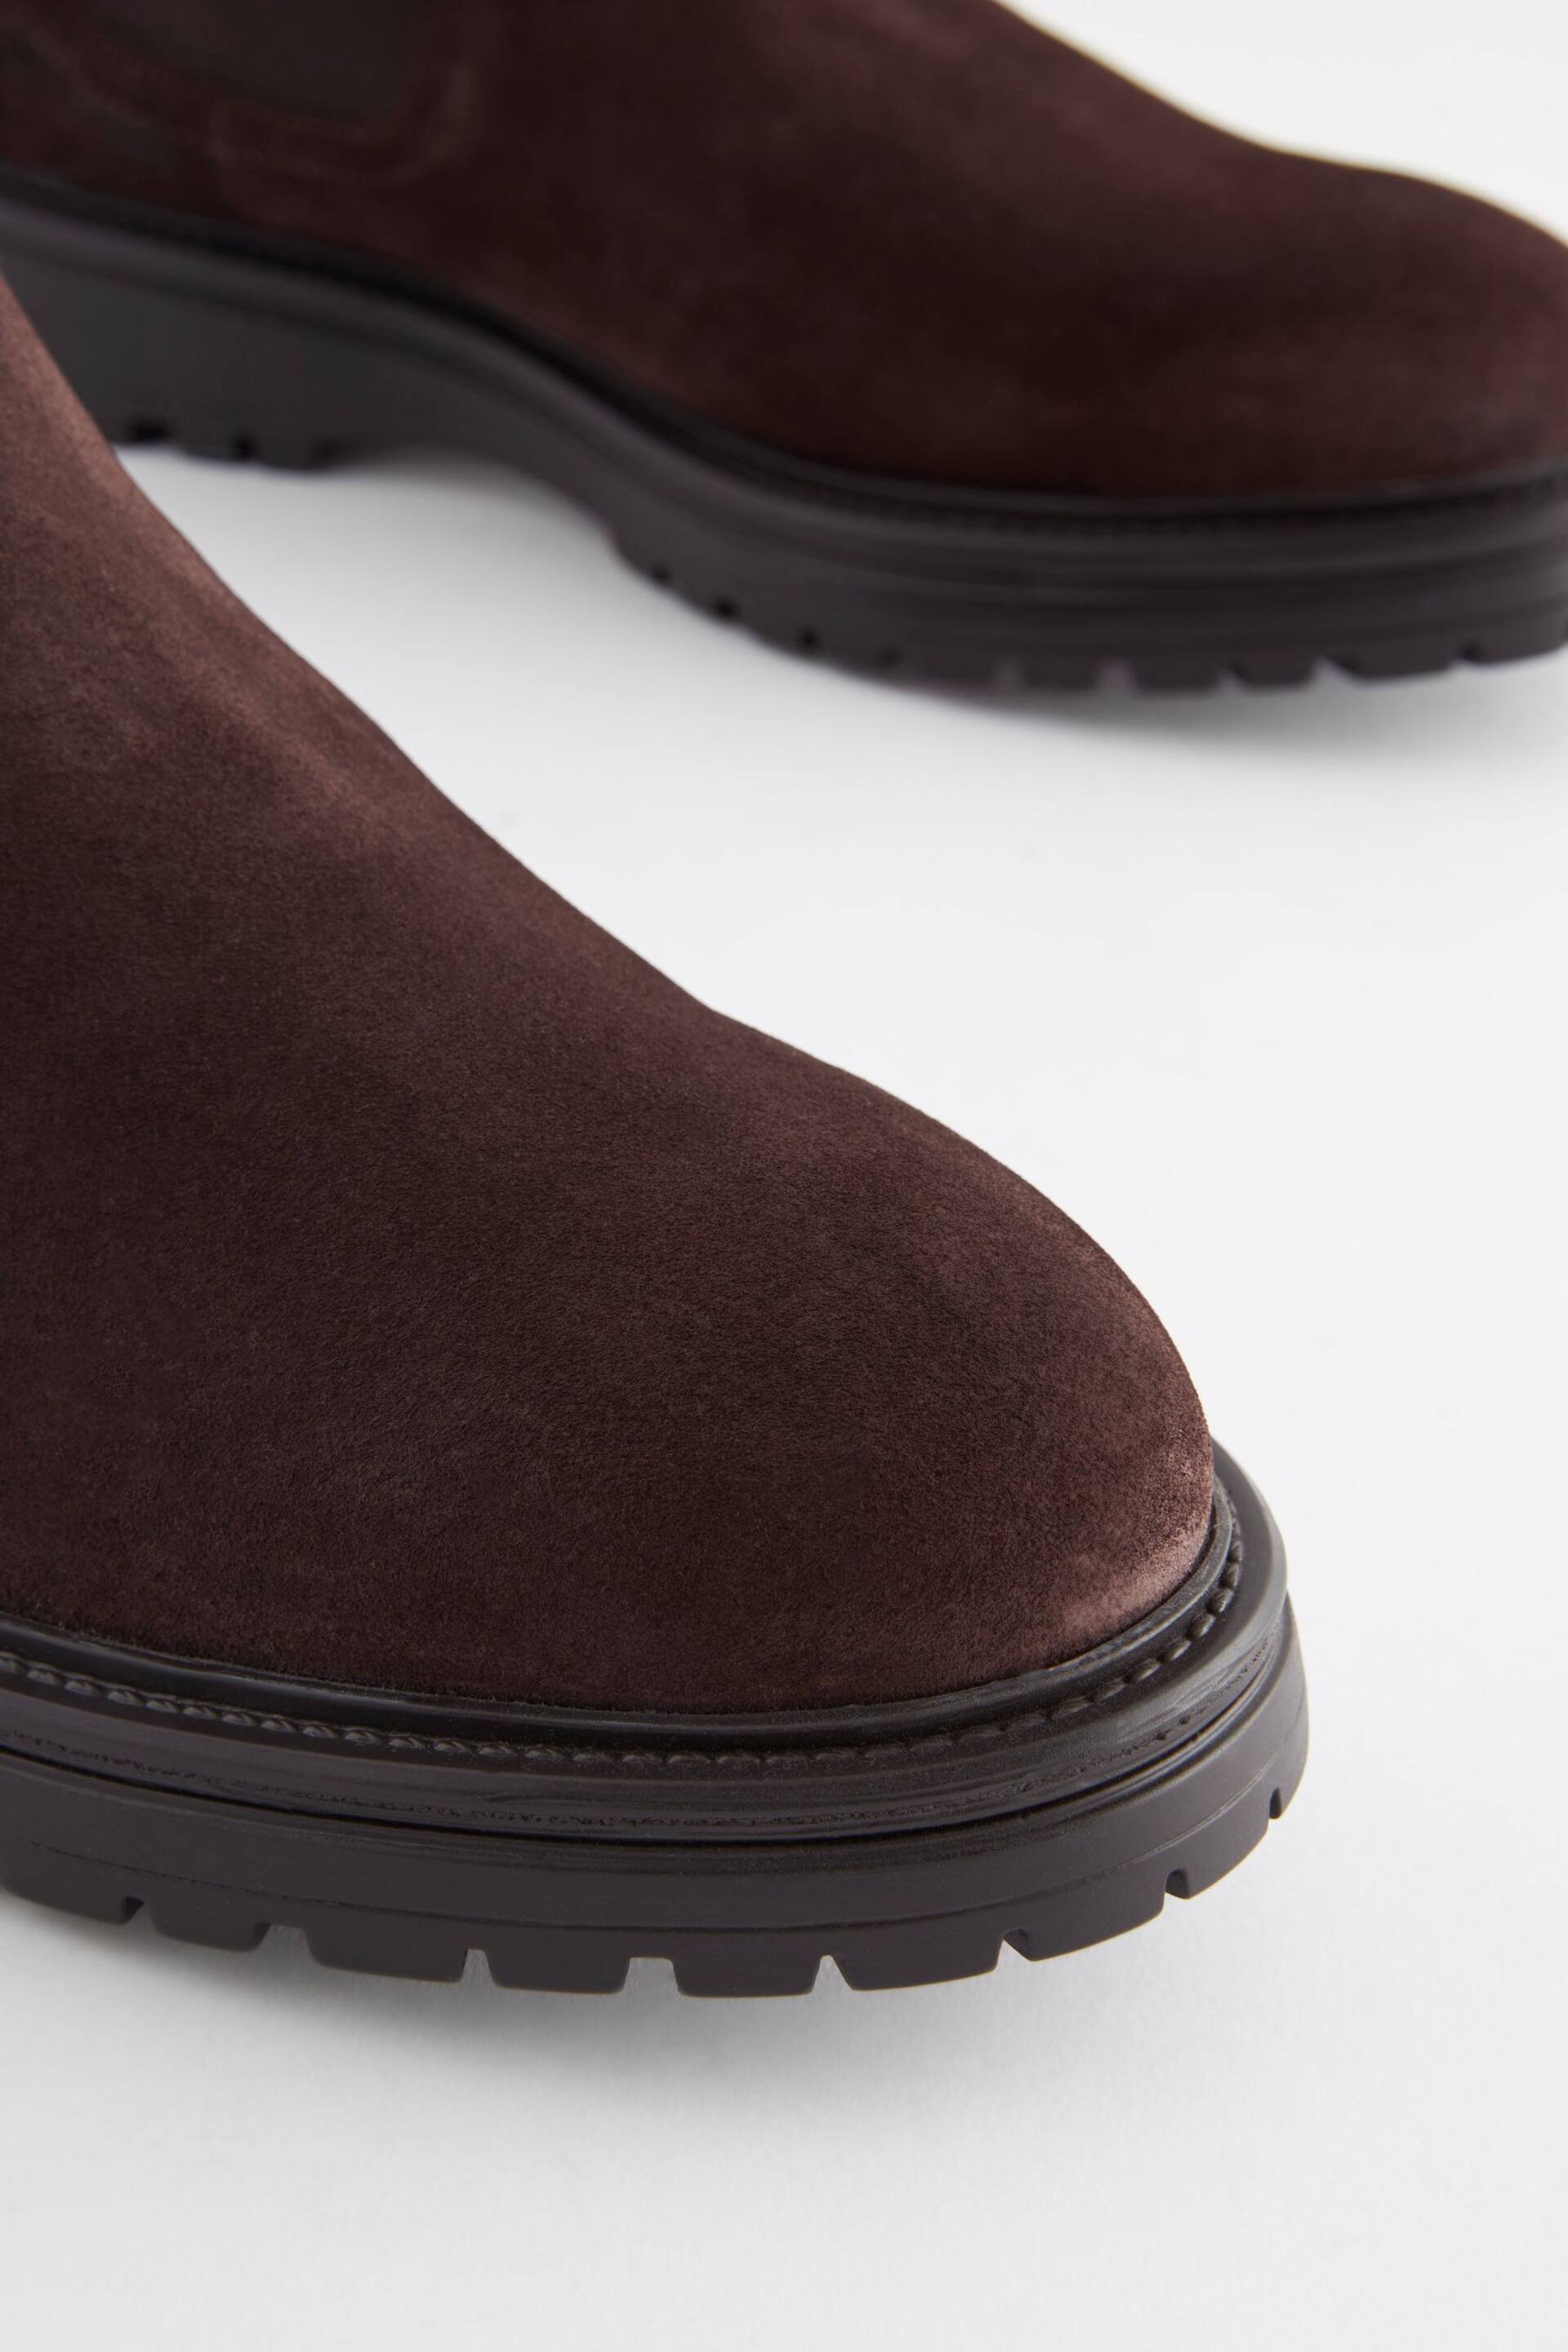 Brown Chunky Leather Chelsea Boots - Image 3 of 5